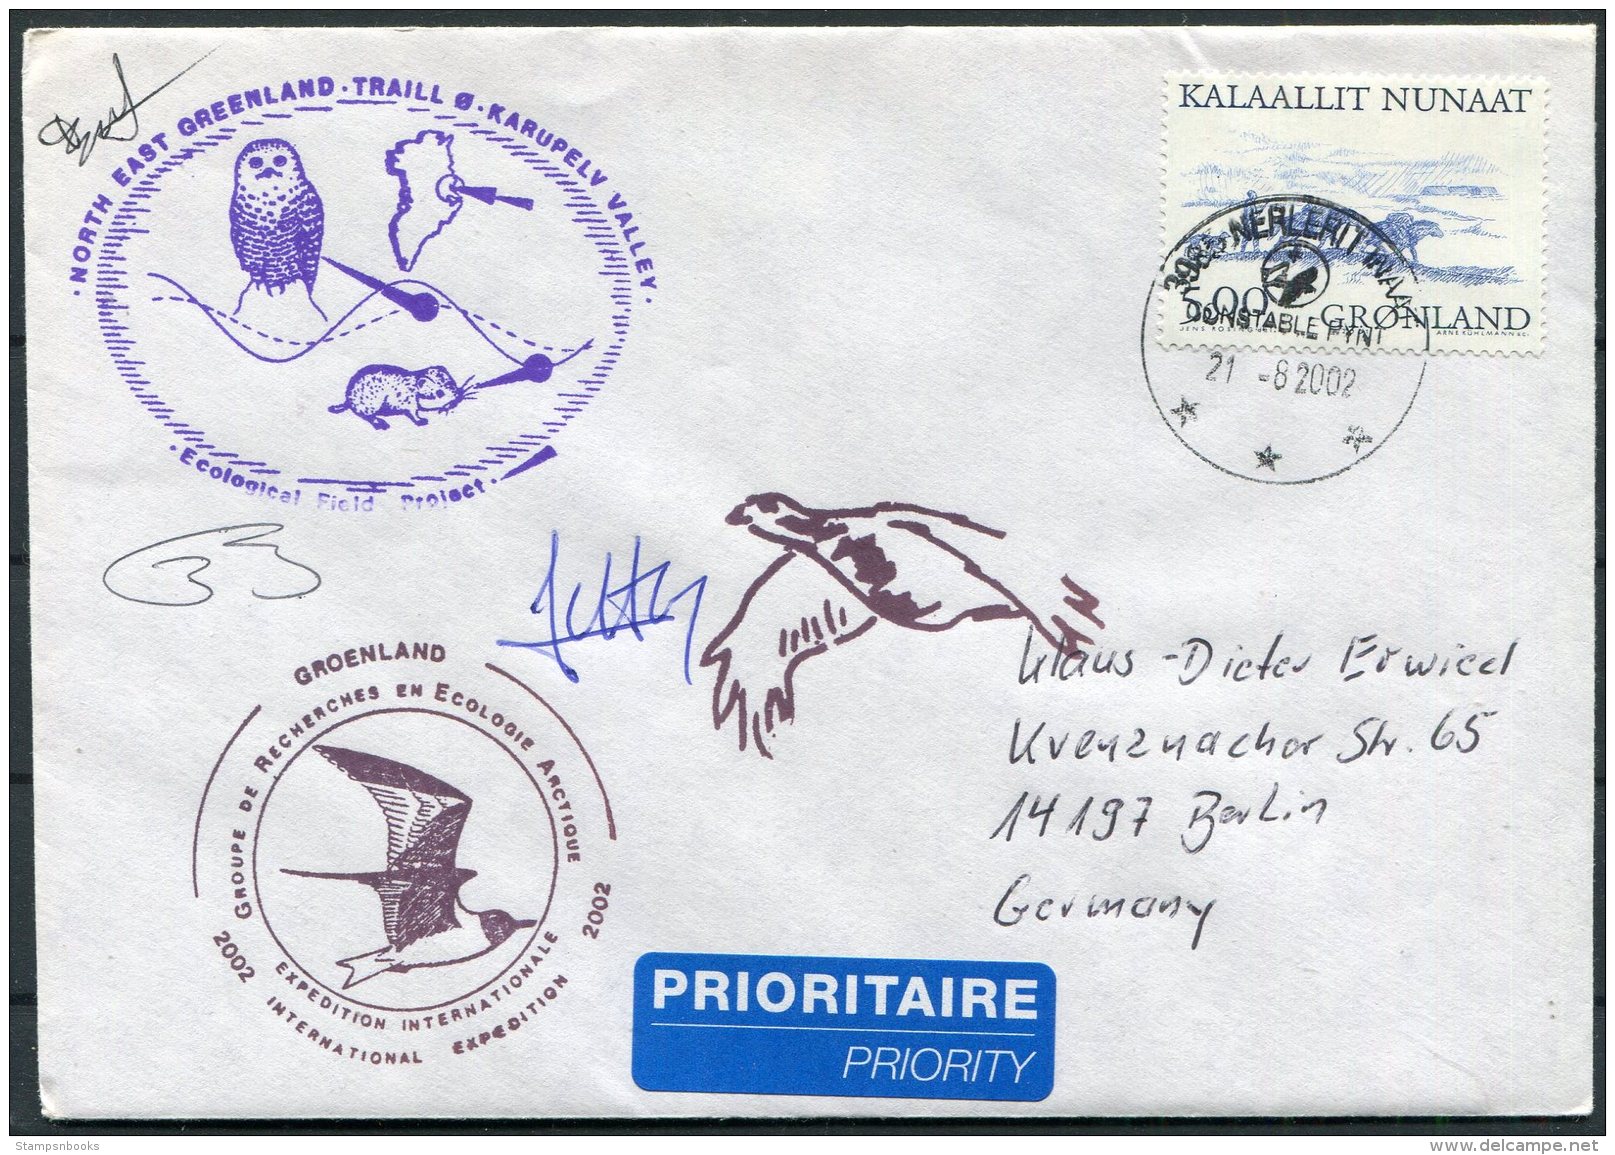 2002 North East Greenland, Karupelv Valley, Polar Owl Birds Research Arctic Expedition Signed Cover - Covers & Documents